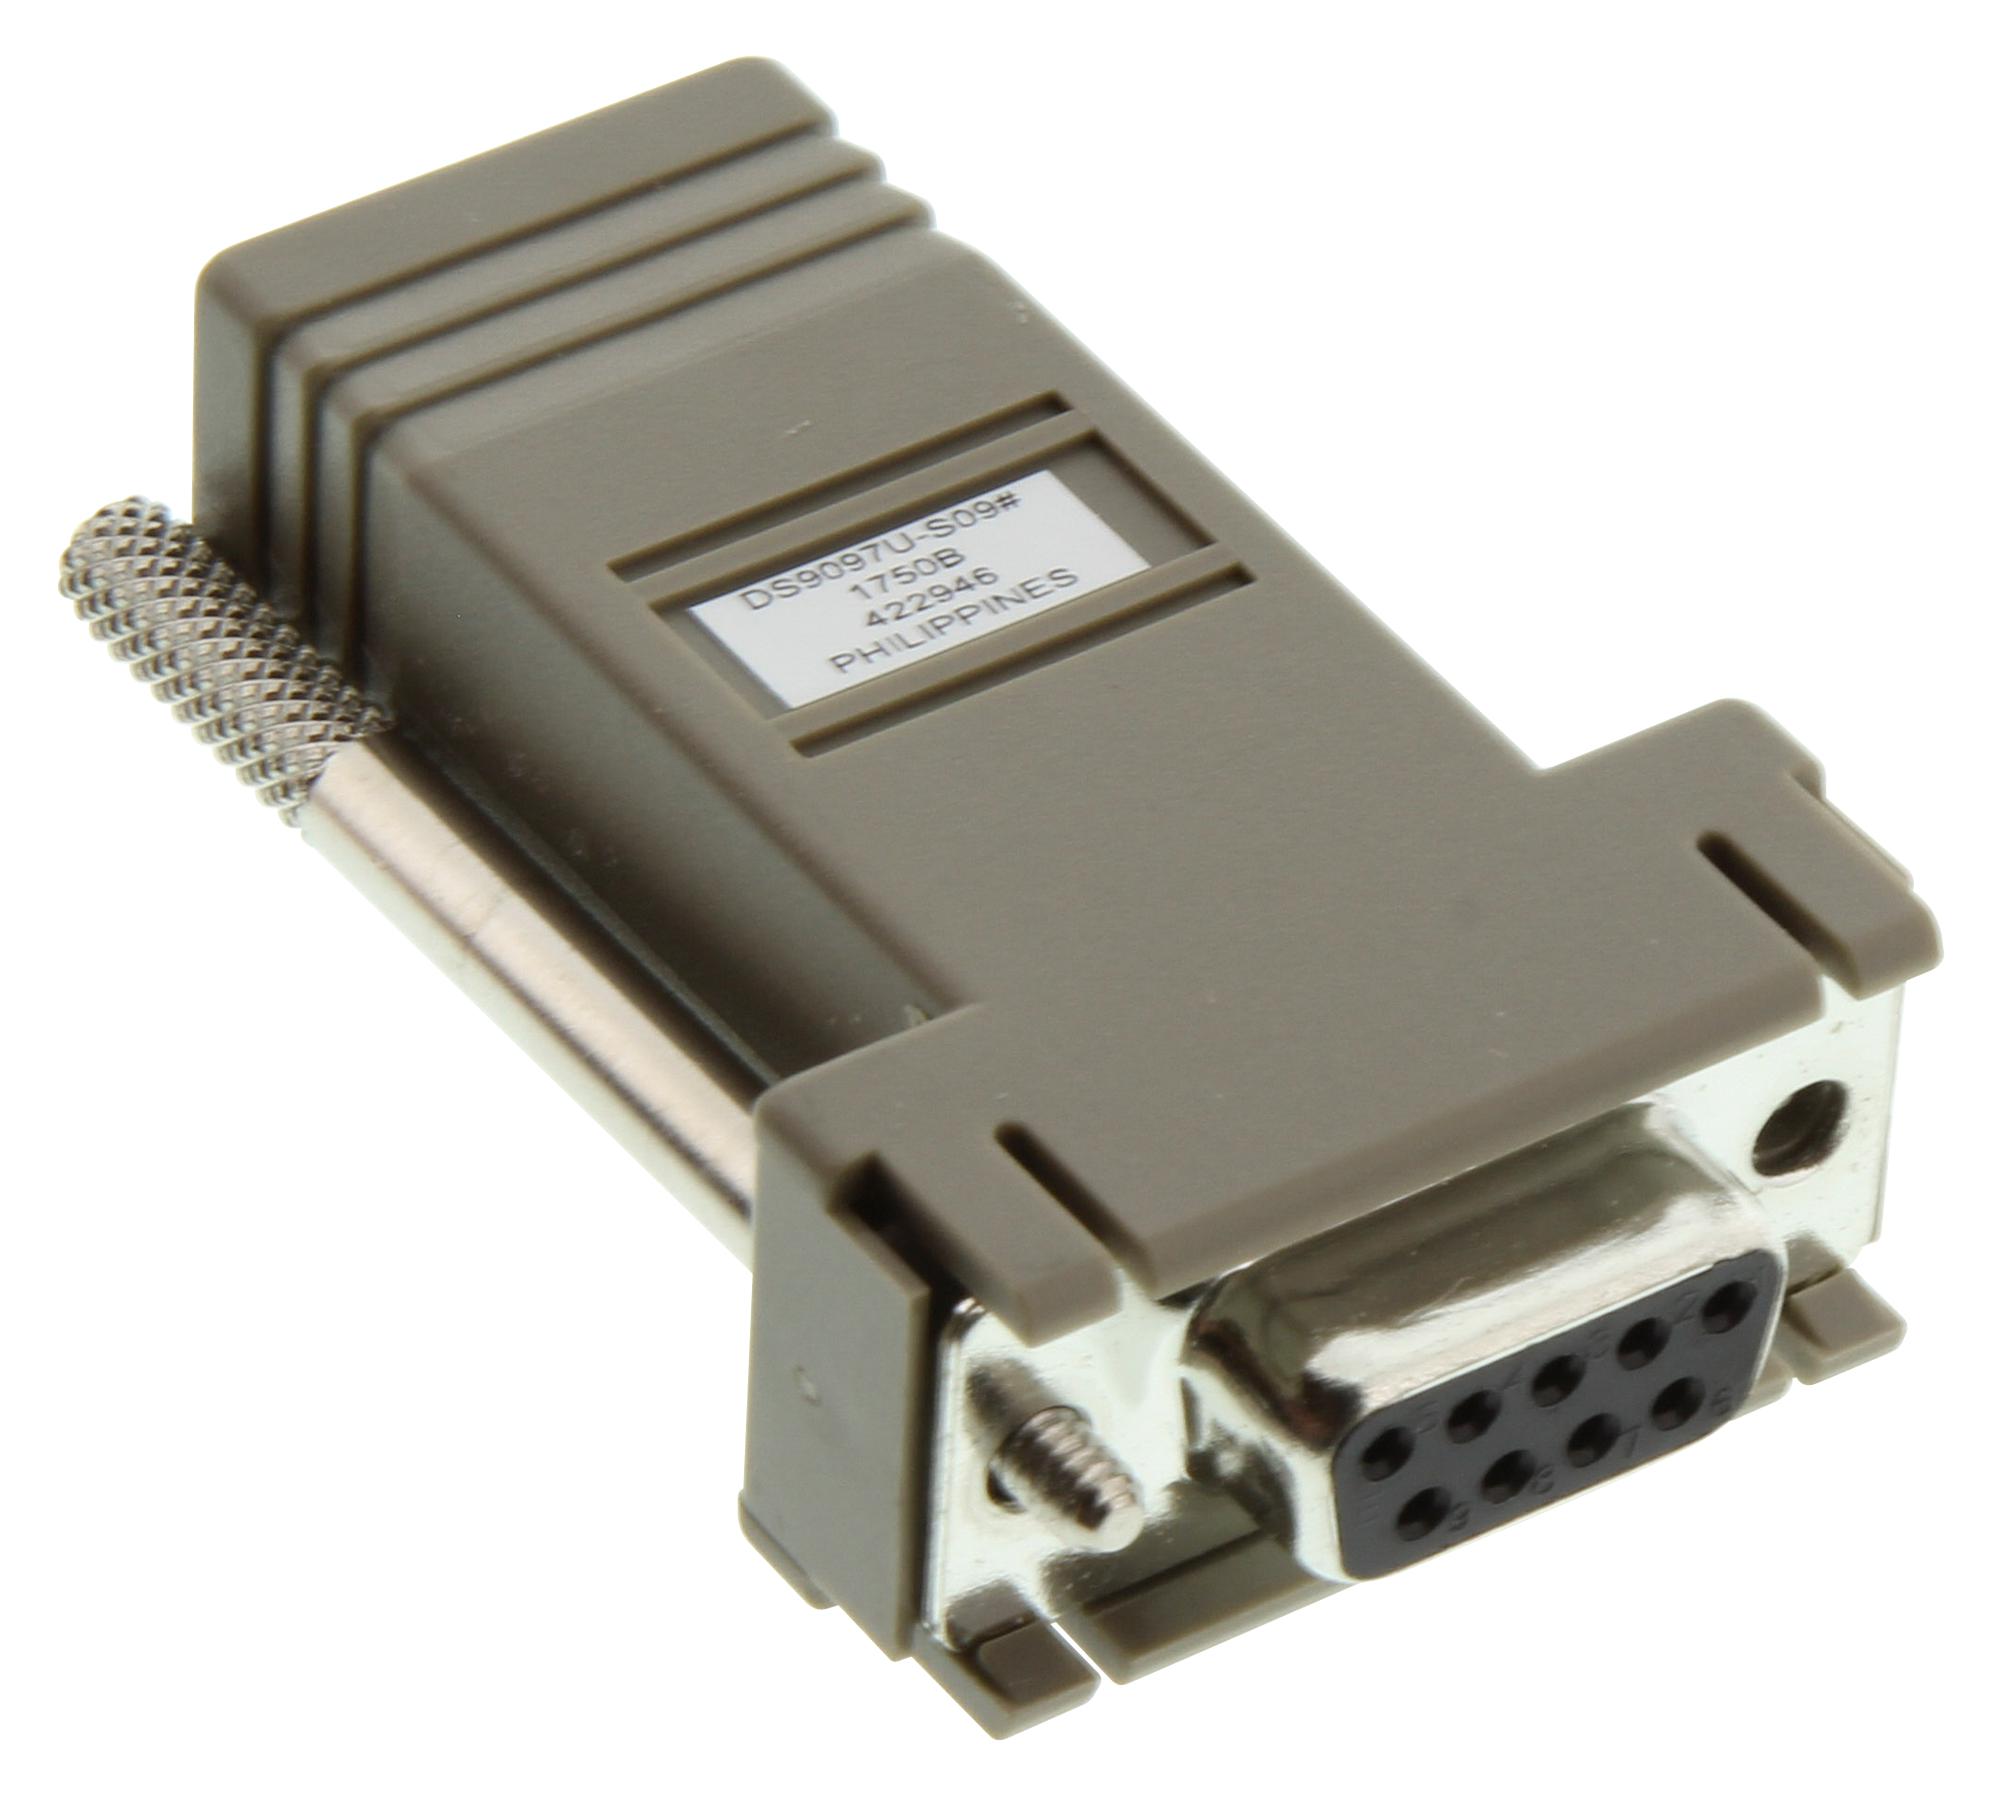 DS9097U-S09# 1 WIRE COM PORT ADAPTOR, RS232, SMD MAXIM INTEGRATED / ANALOG DEVICES